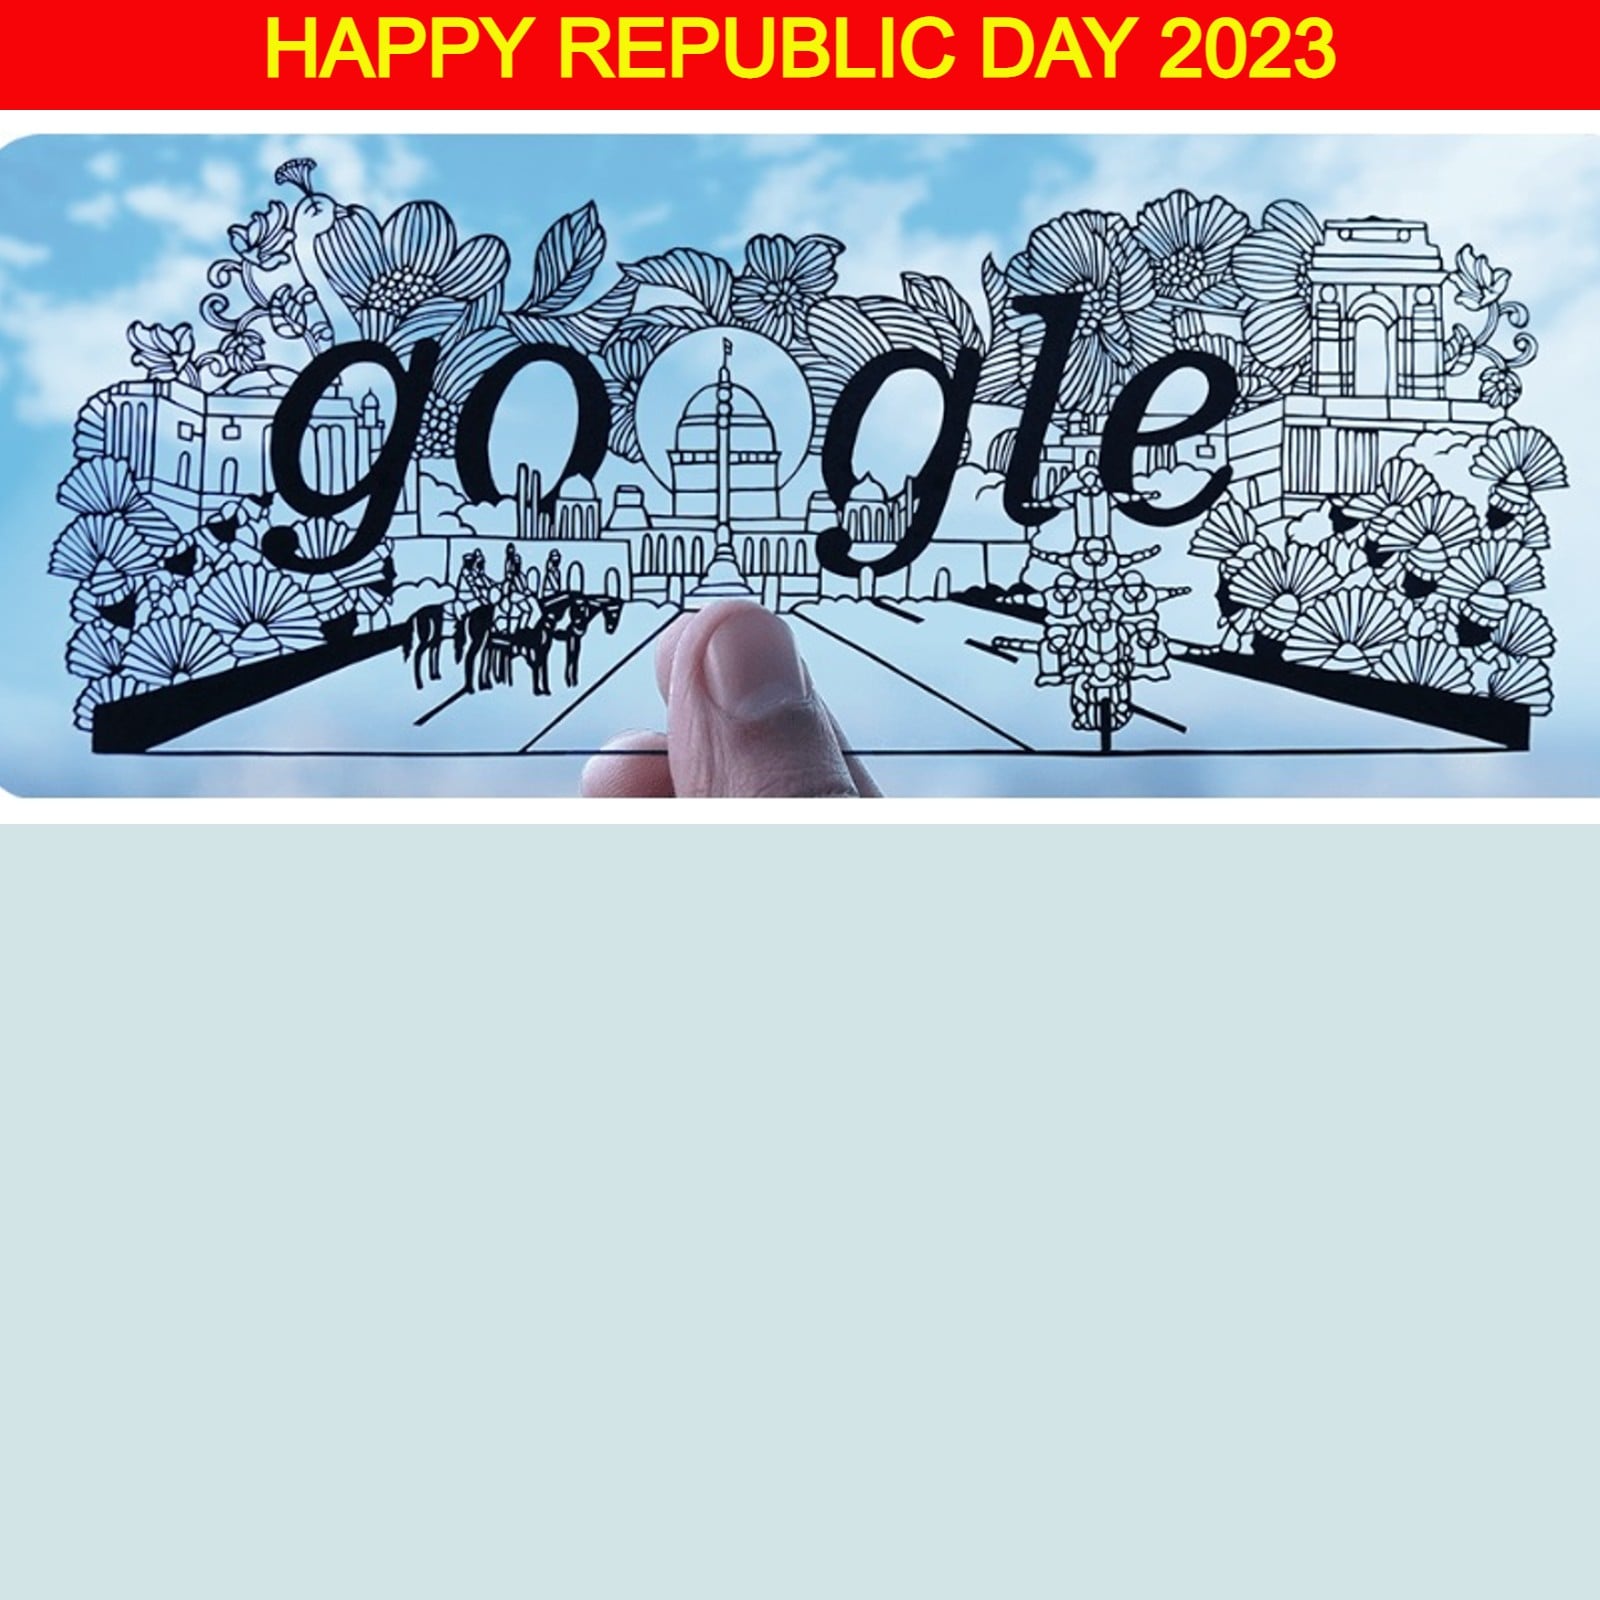 Republic Day 2023: Google Doodle uses hand-cut paper to feature